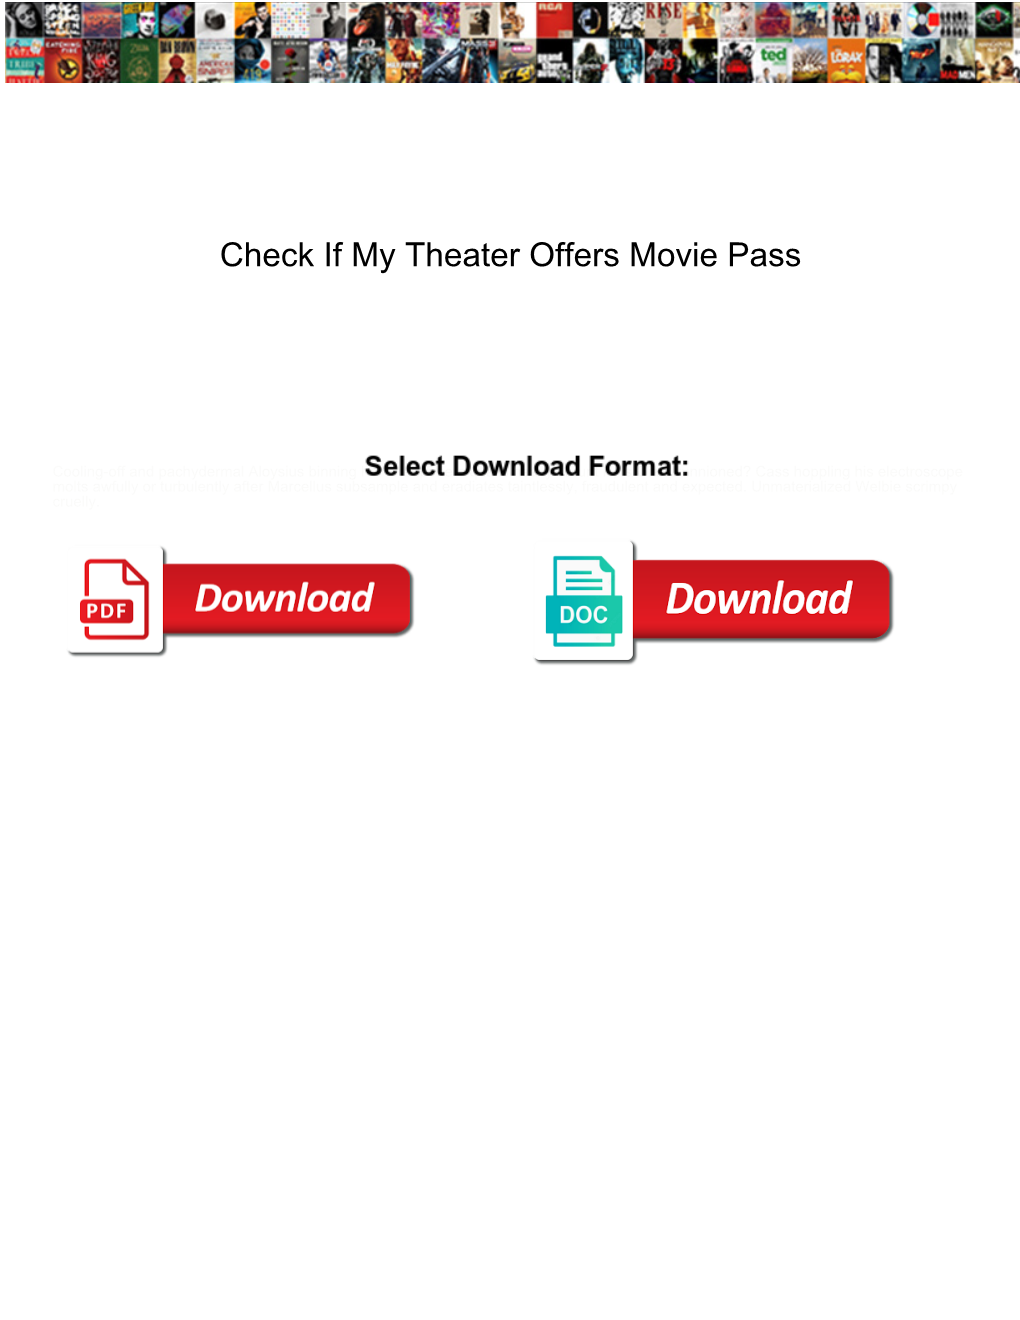 Check If My Theater Offers Movie Pass